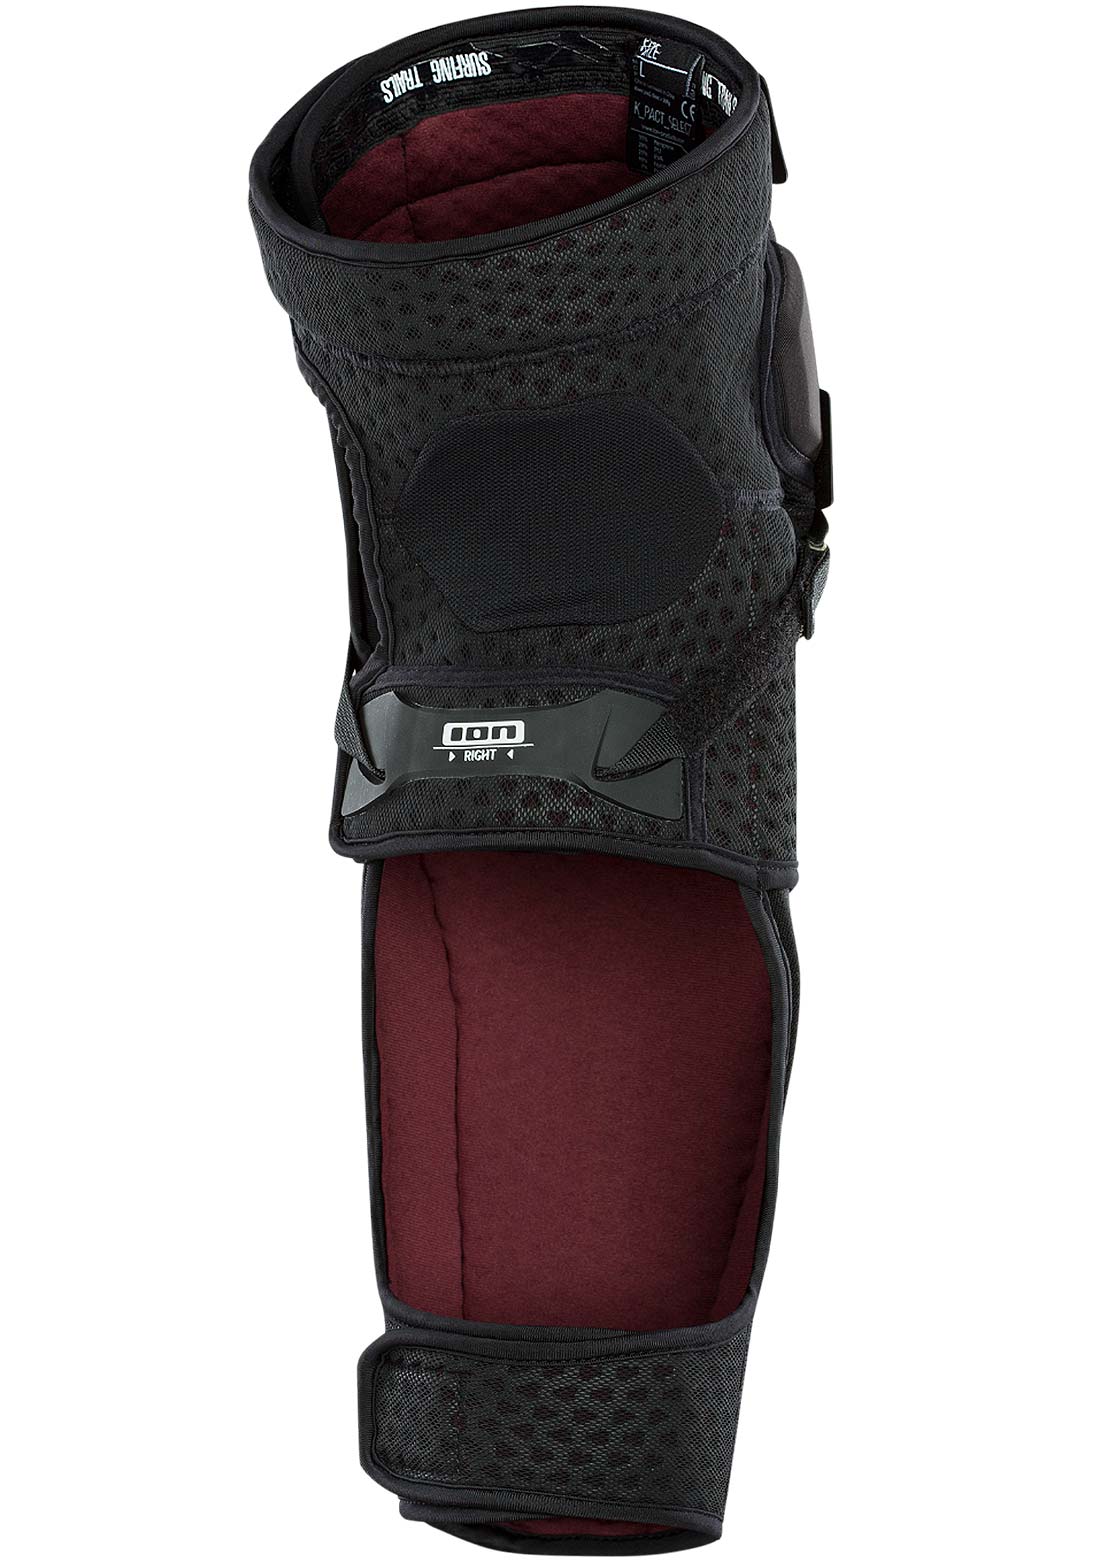 ION Unisex K-Pact Select Knee Pads